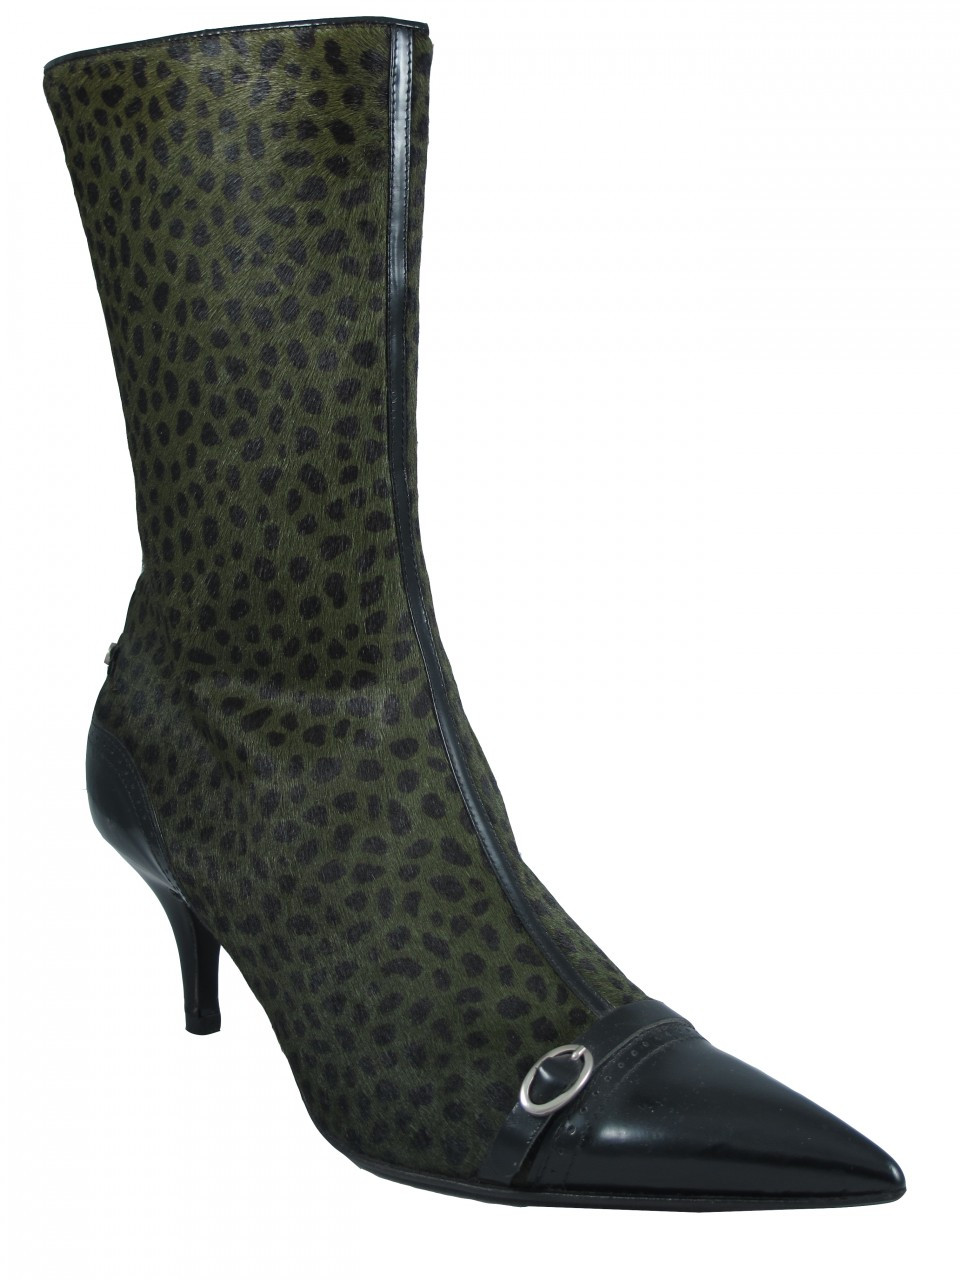 Women's Pointy Mid Calf Low Heel Italian Boots 1120 By Davinci, Avaliable  in Pink, Black, Green Pony Hair